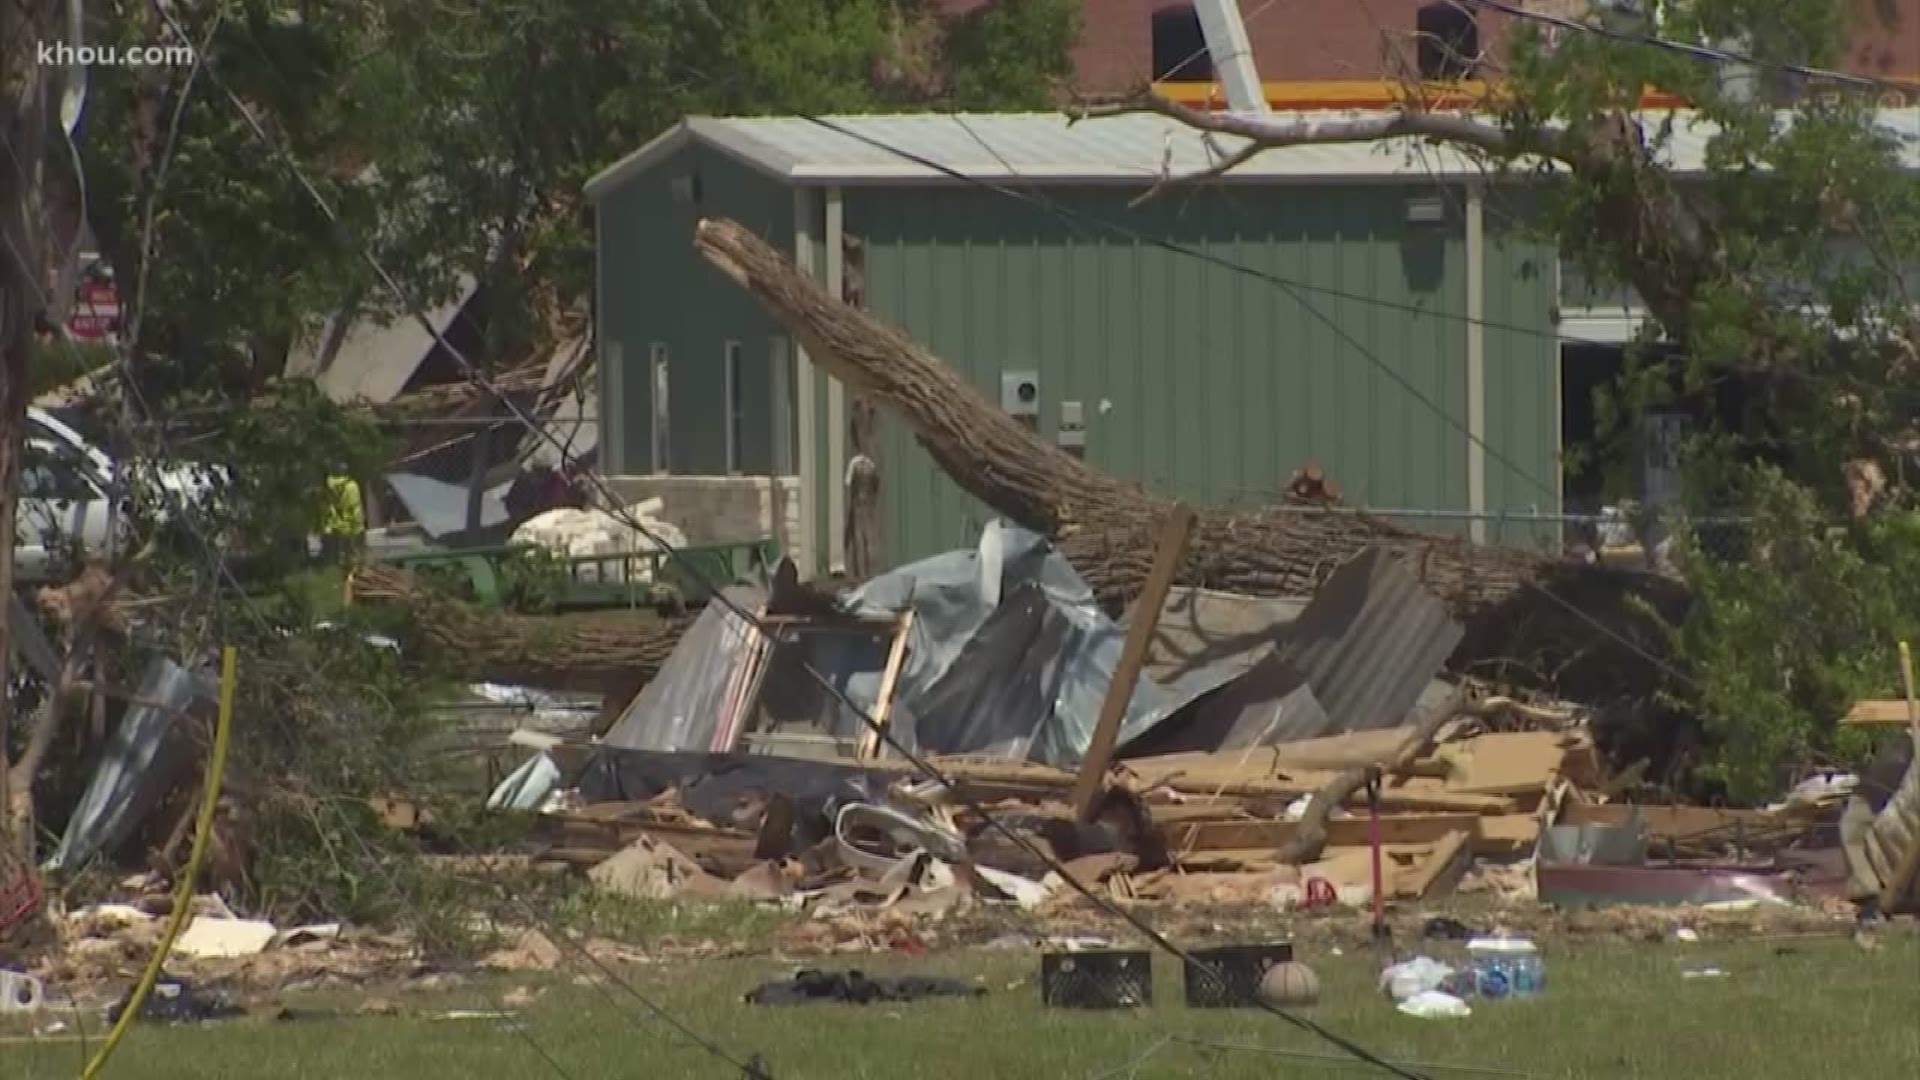 A father and five of his children were thrown from their home as a tornado moved through the small town of Franklin on Saturday.